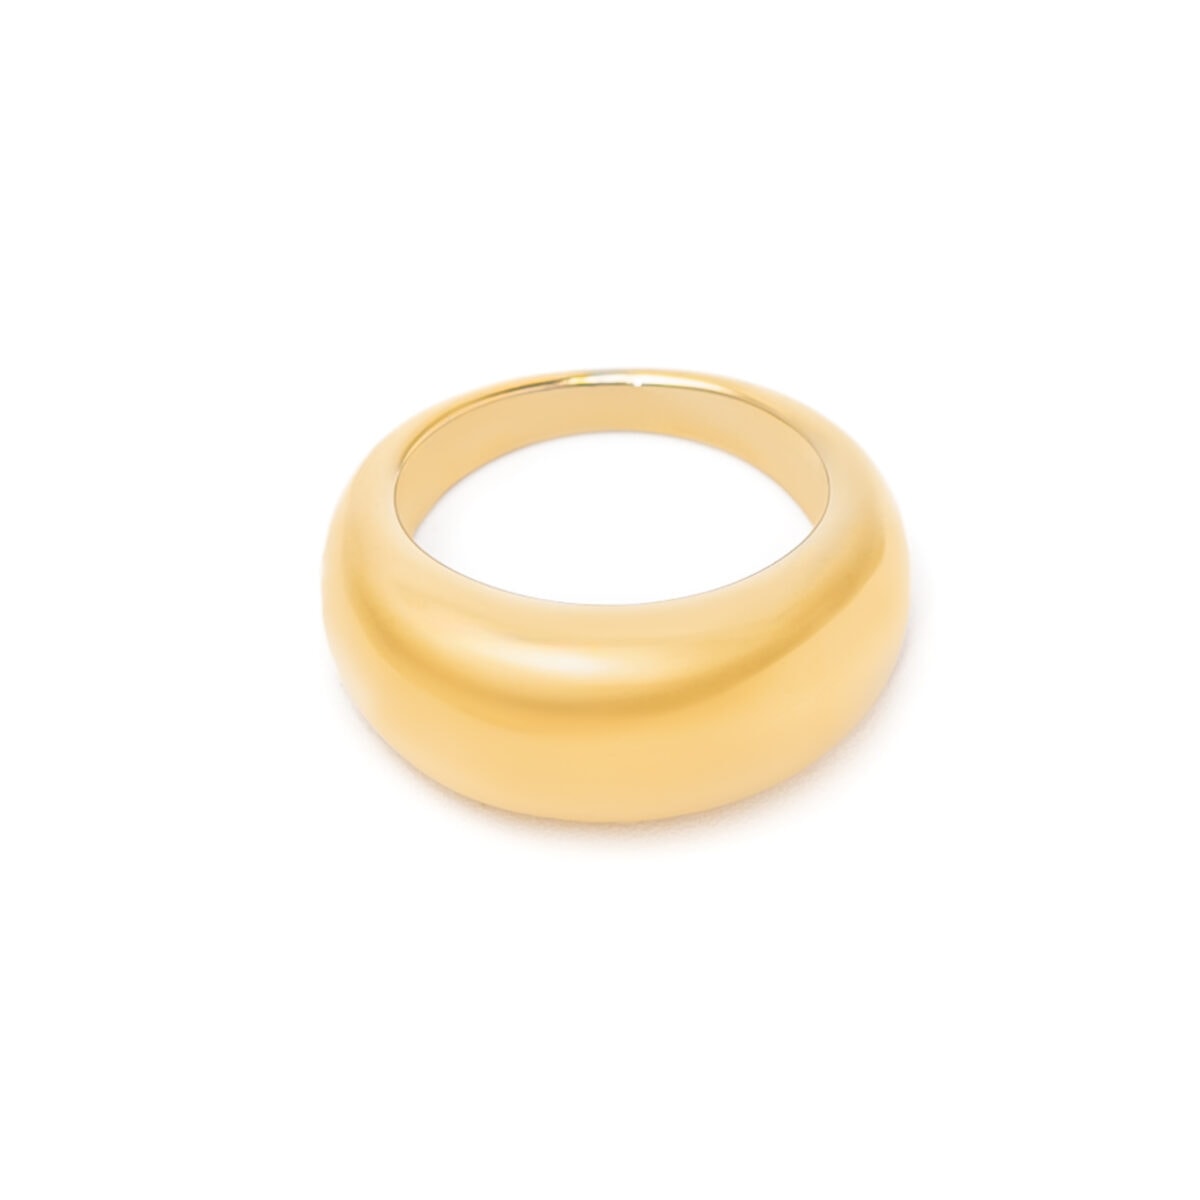 https://m.clubbella.co/product/gold-dome-ring/ Gold dome ring - 02a